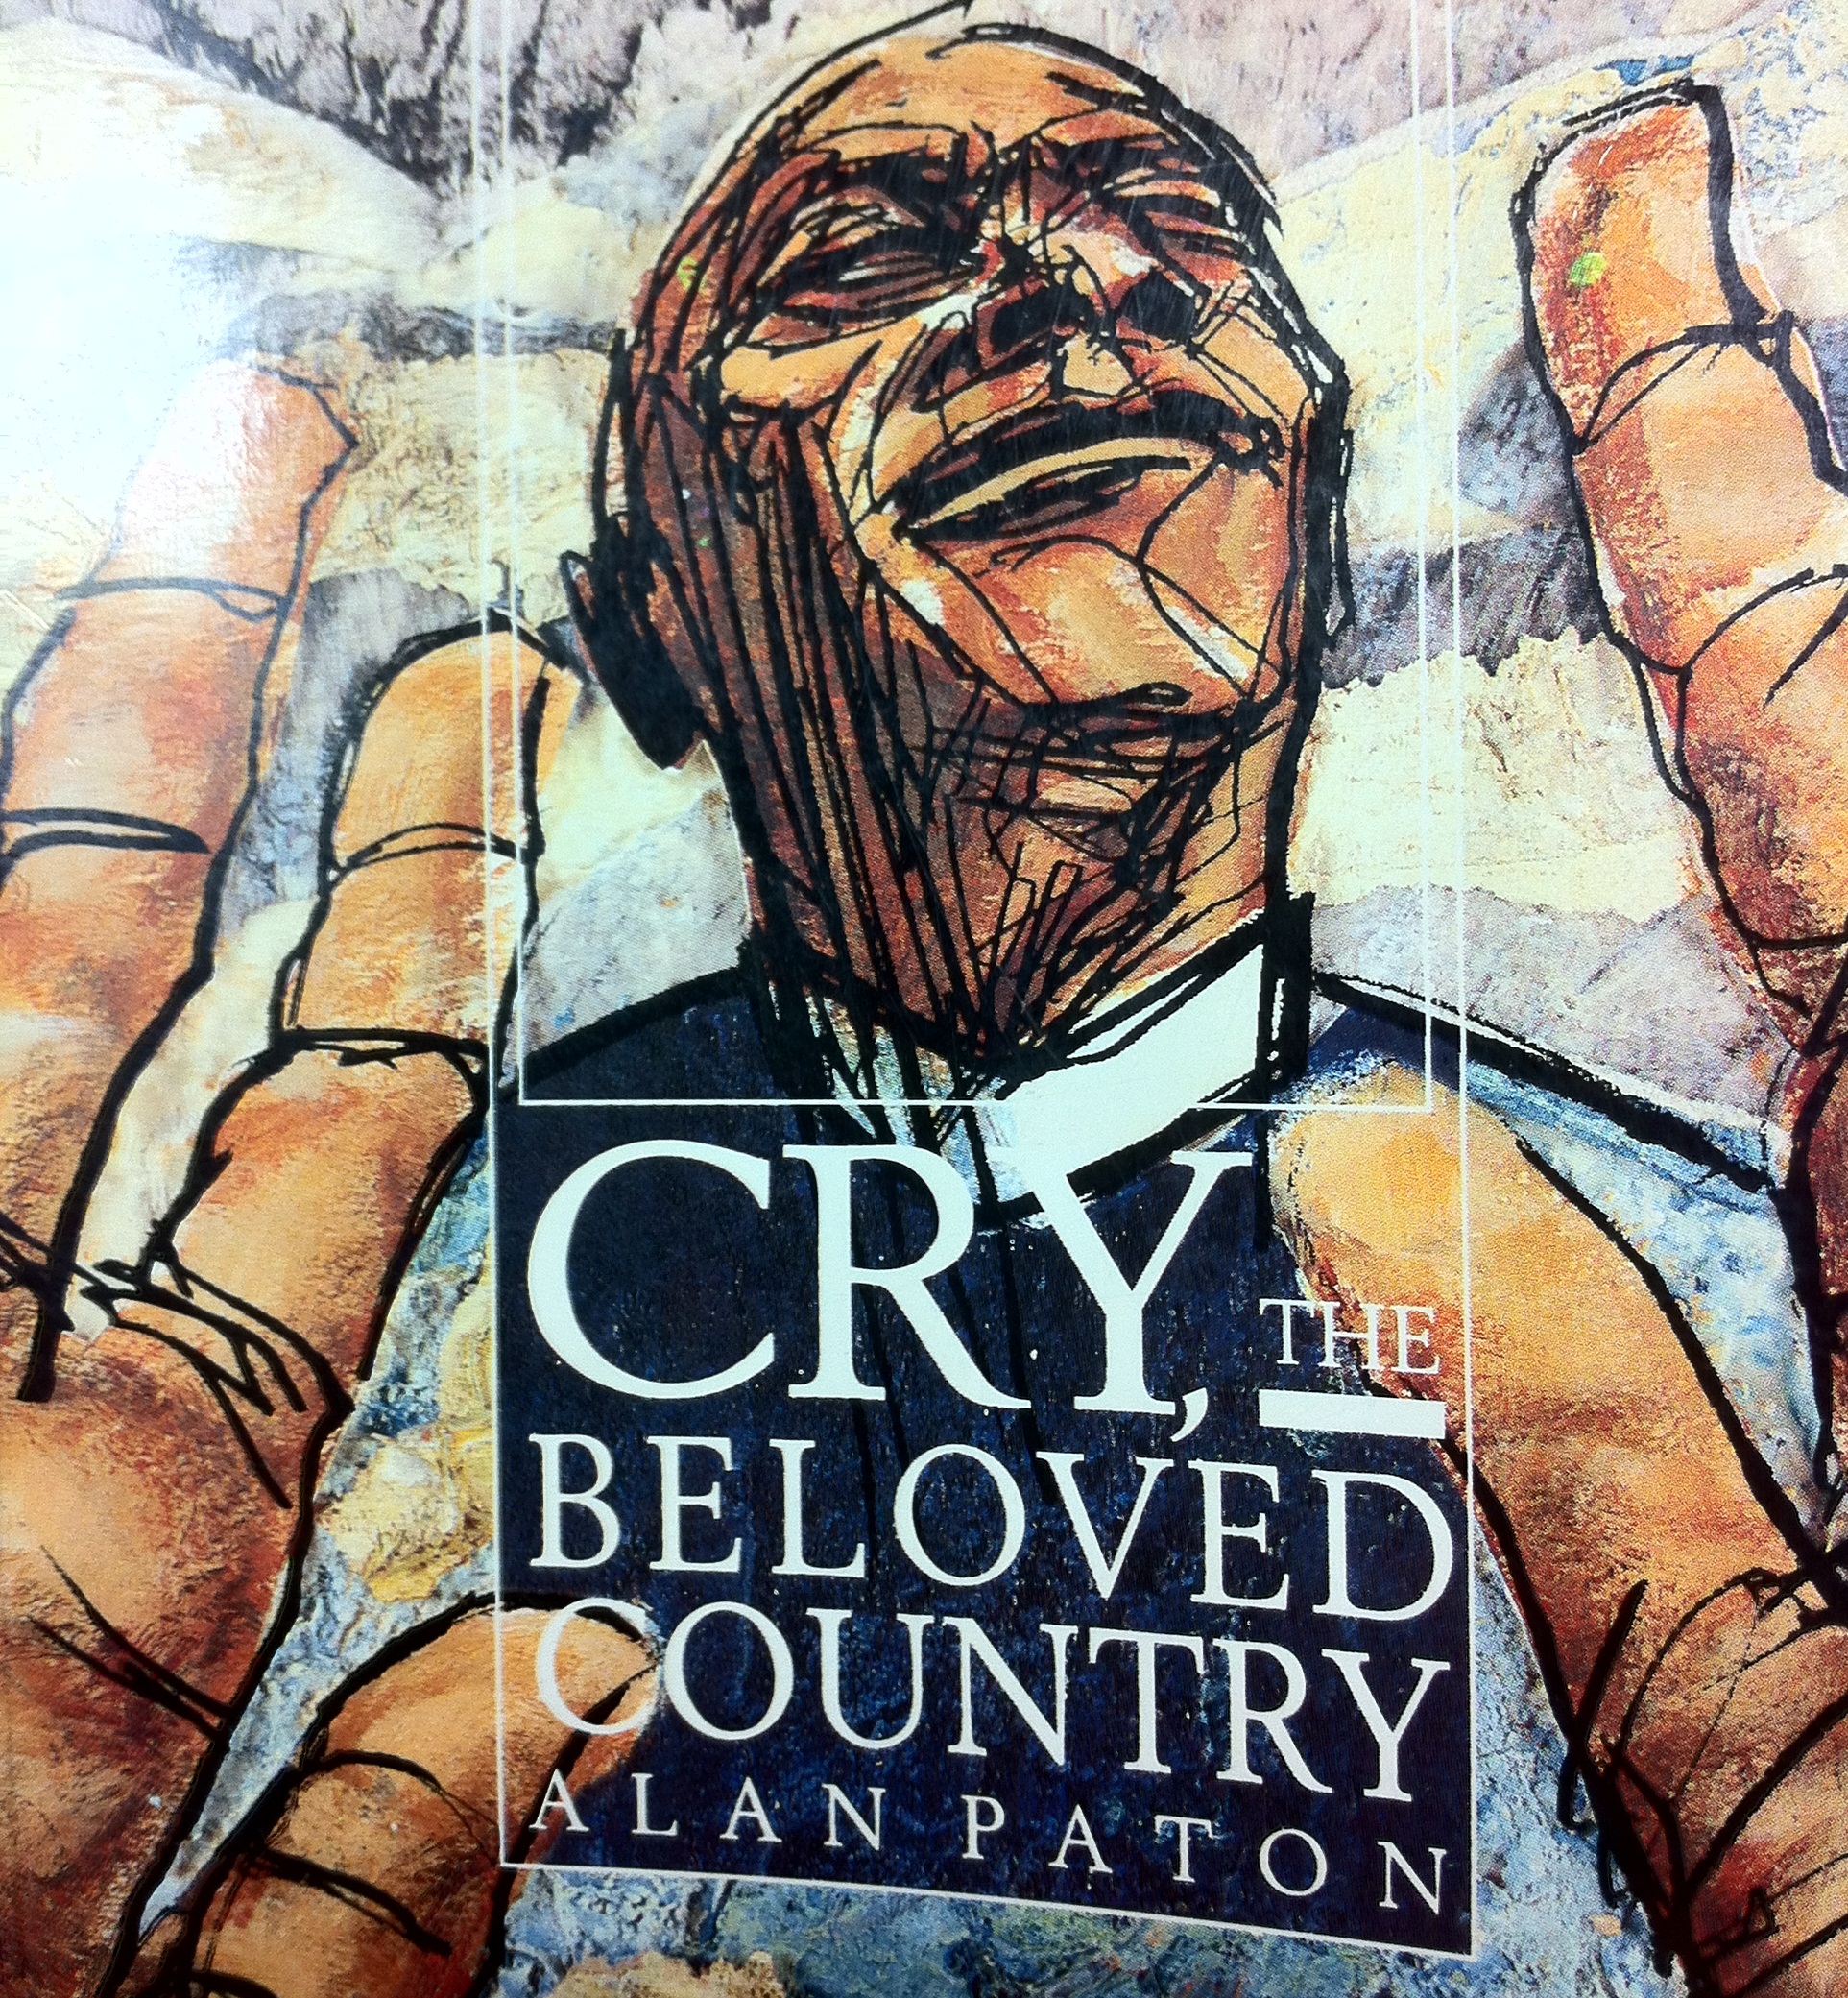 Essays on cry the beloved country